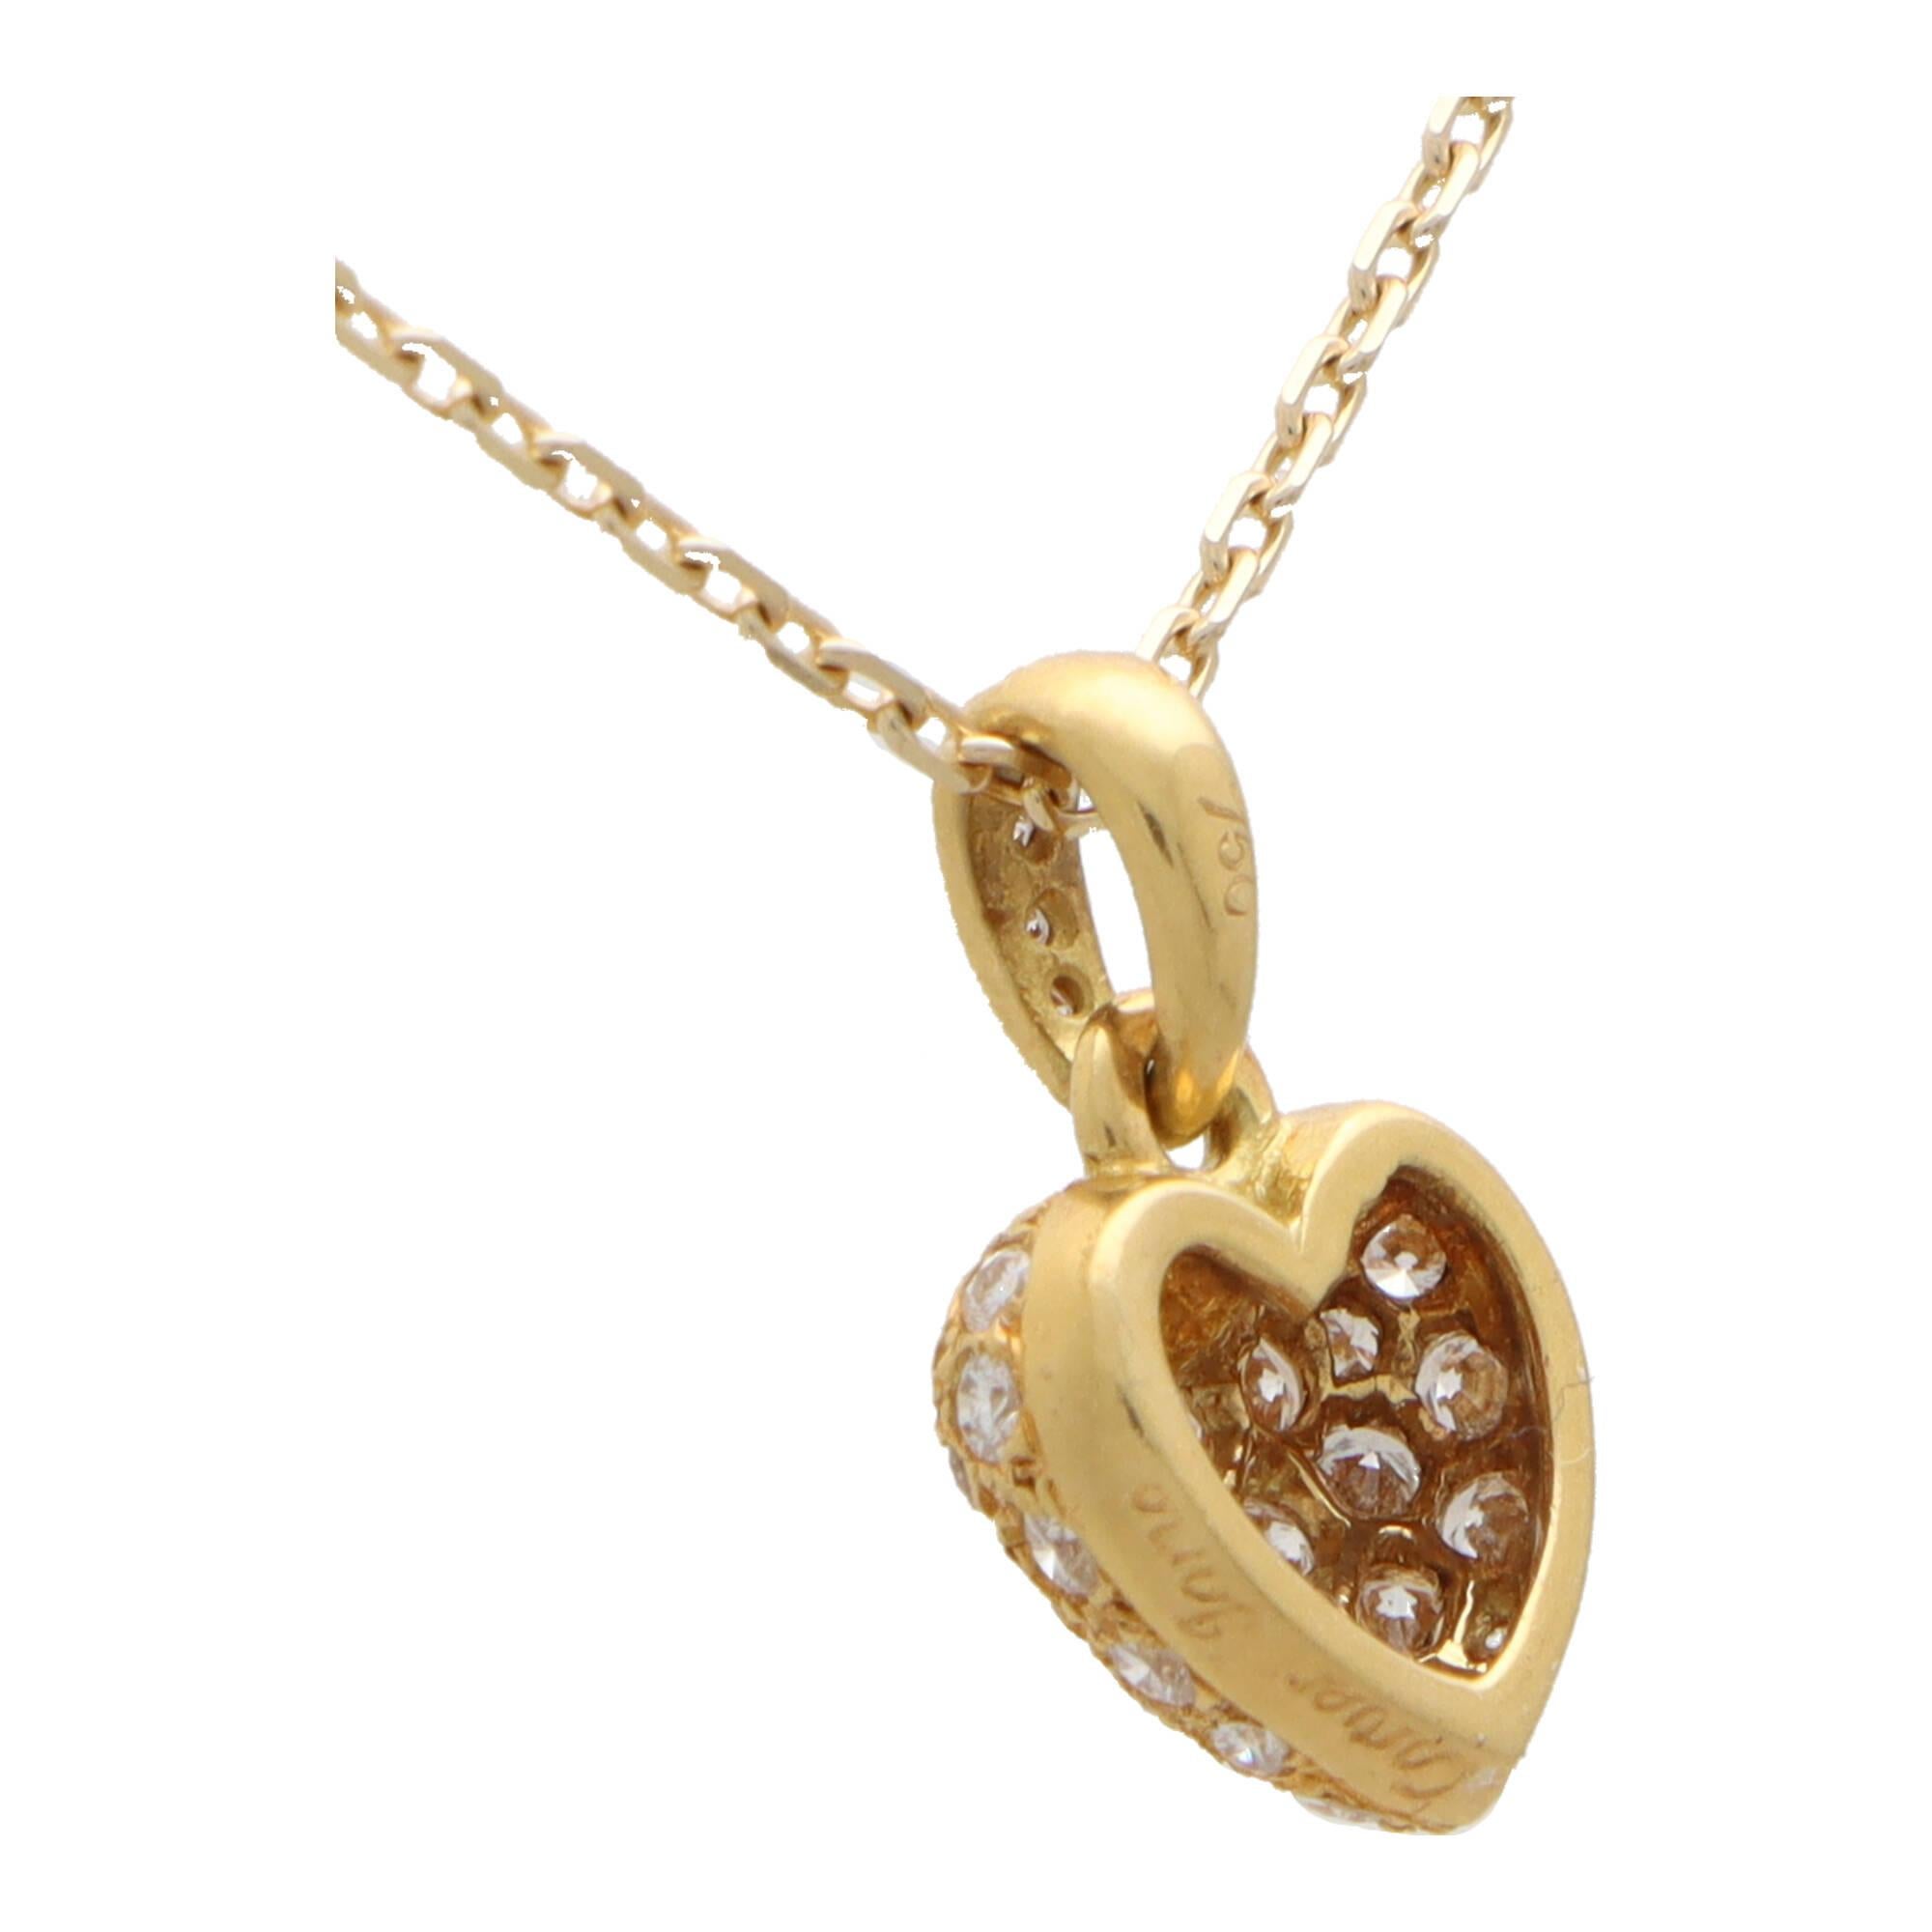 Women's or Men's Vintage Cartier Diamond Heart Pendant Necklace in 18k Yellow Gold For Sale